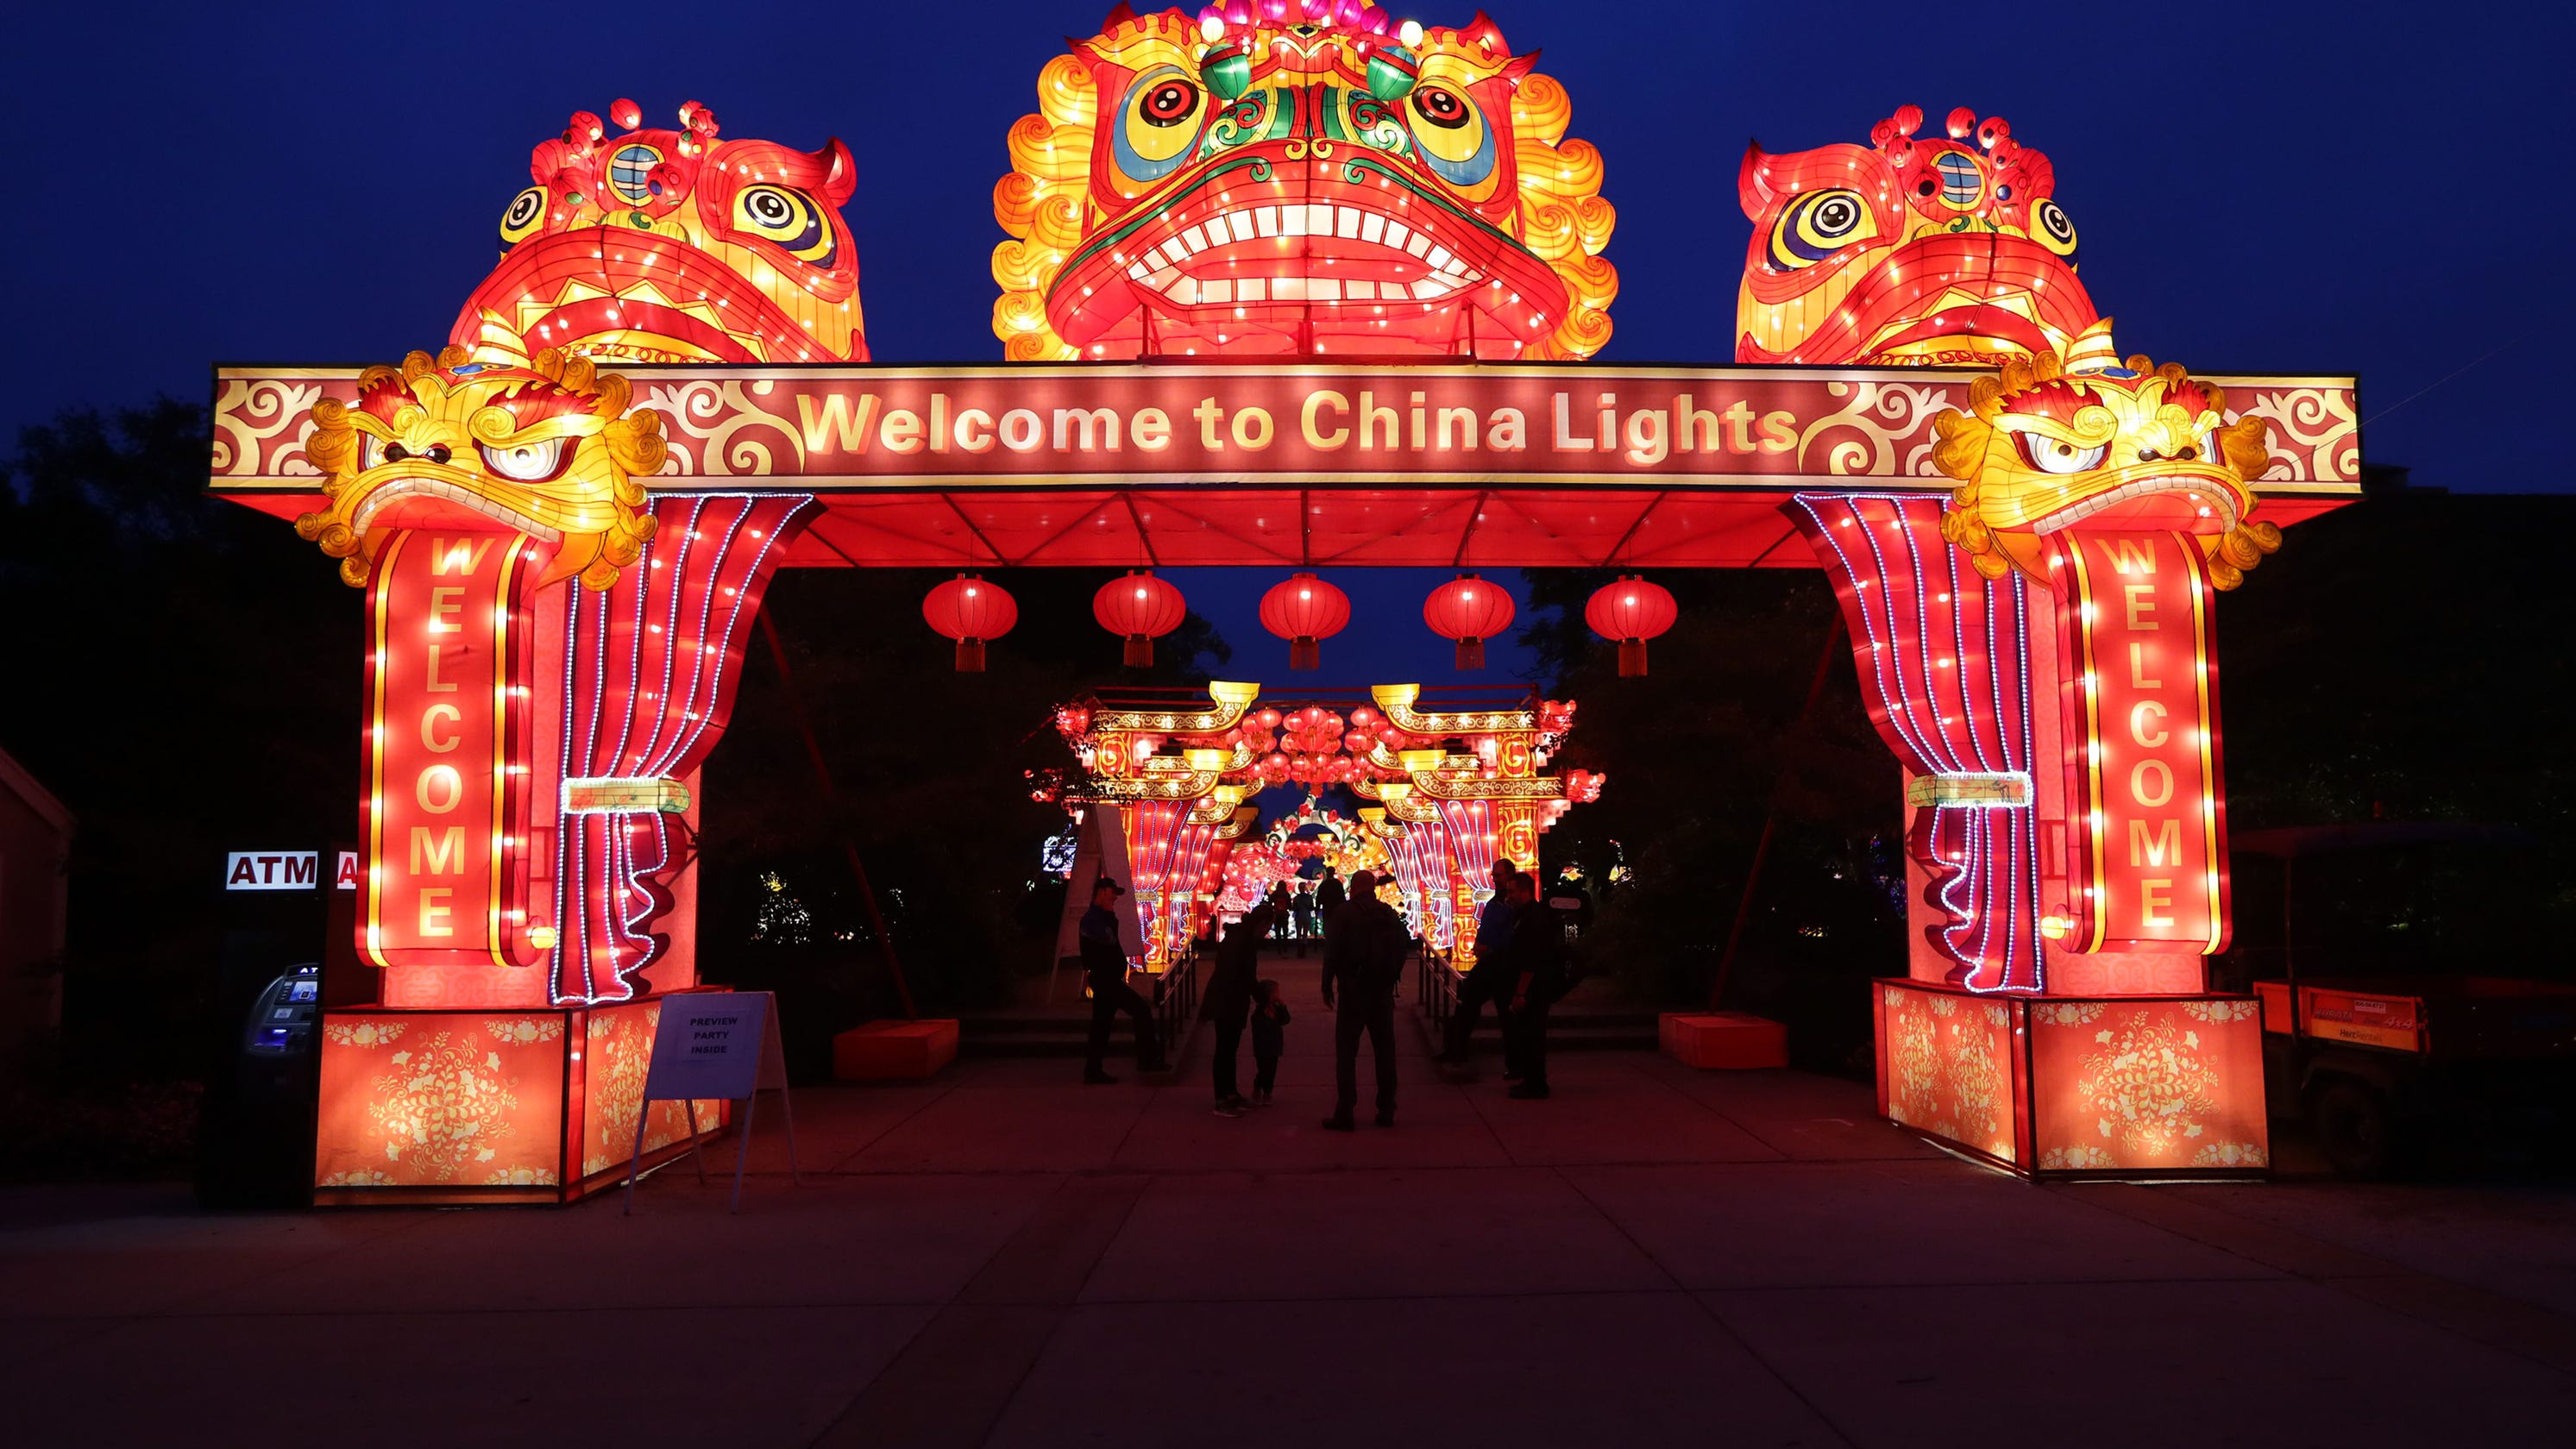 China Lights 2019: What you need to know about the Whitnall Park show